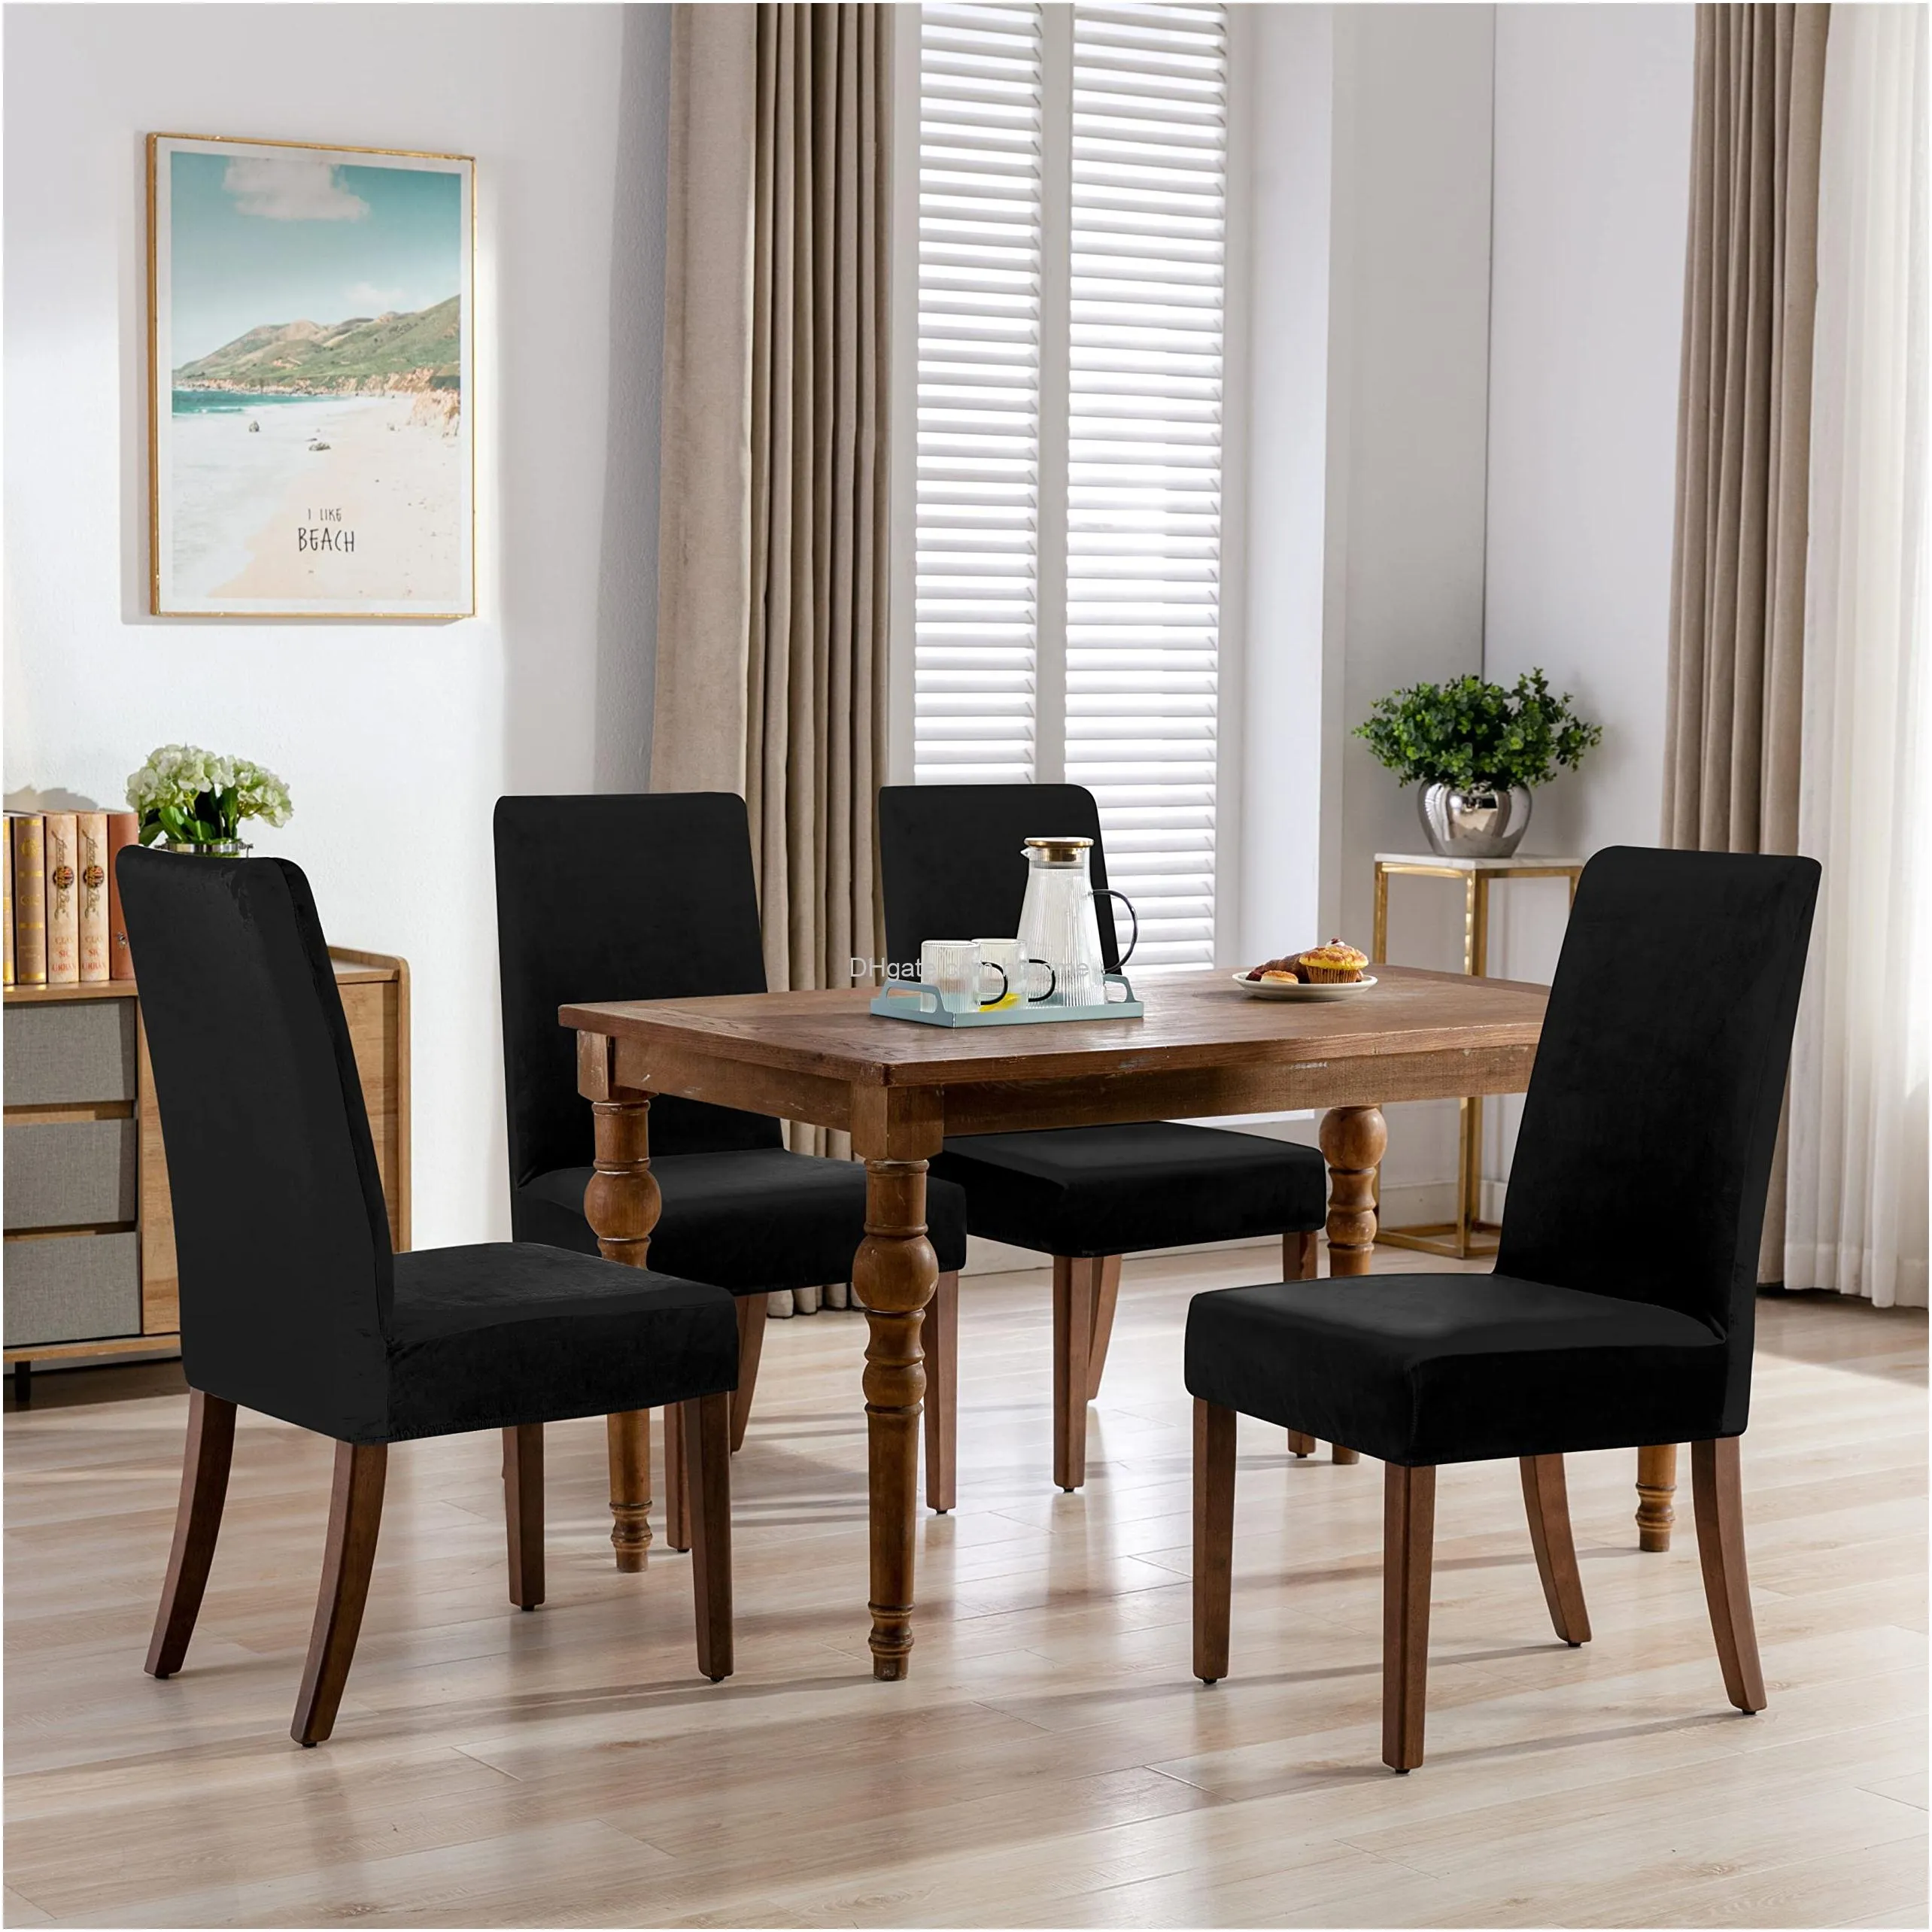 velvet stretch dining room chair covers soft removable dining chair slipcovers set of 2 black